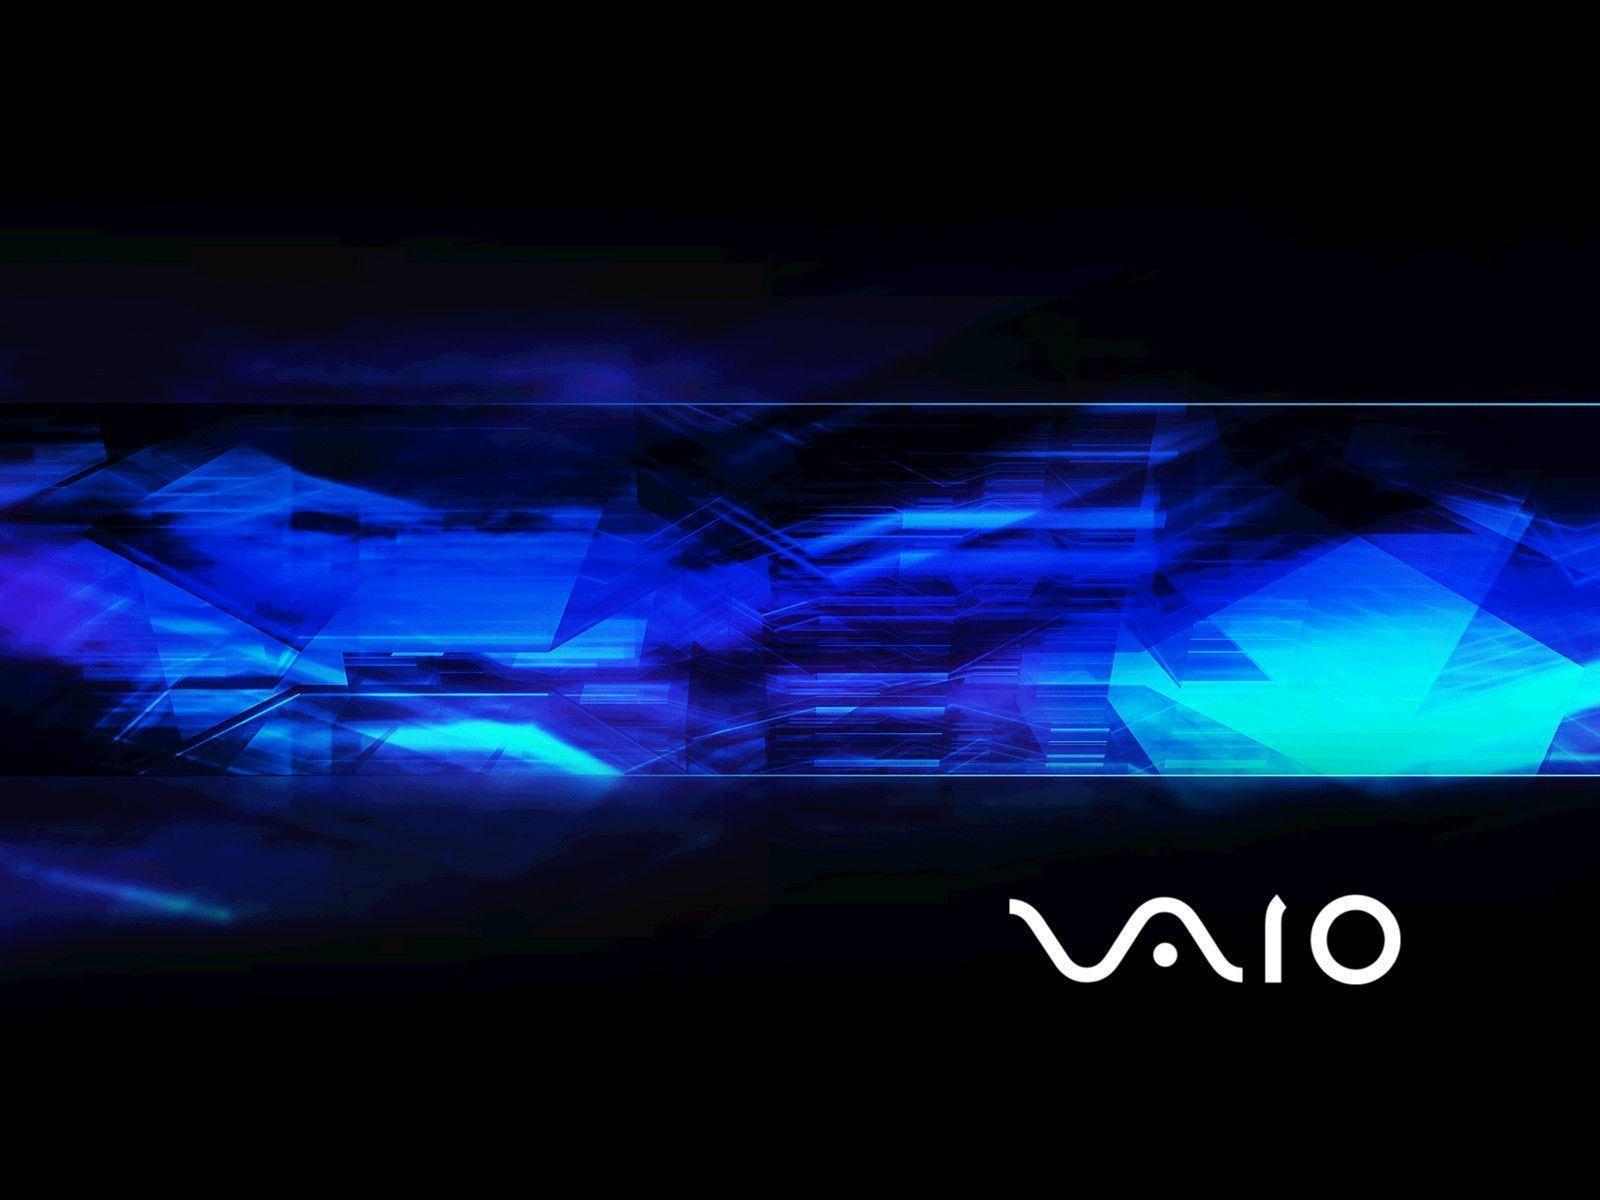 Vaio Wallpaper: Free Download Wallpaper For Sony Vaio Laptop